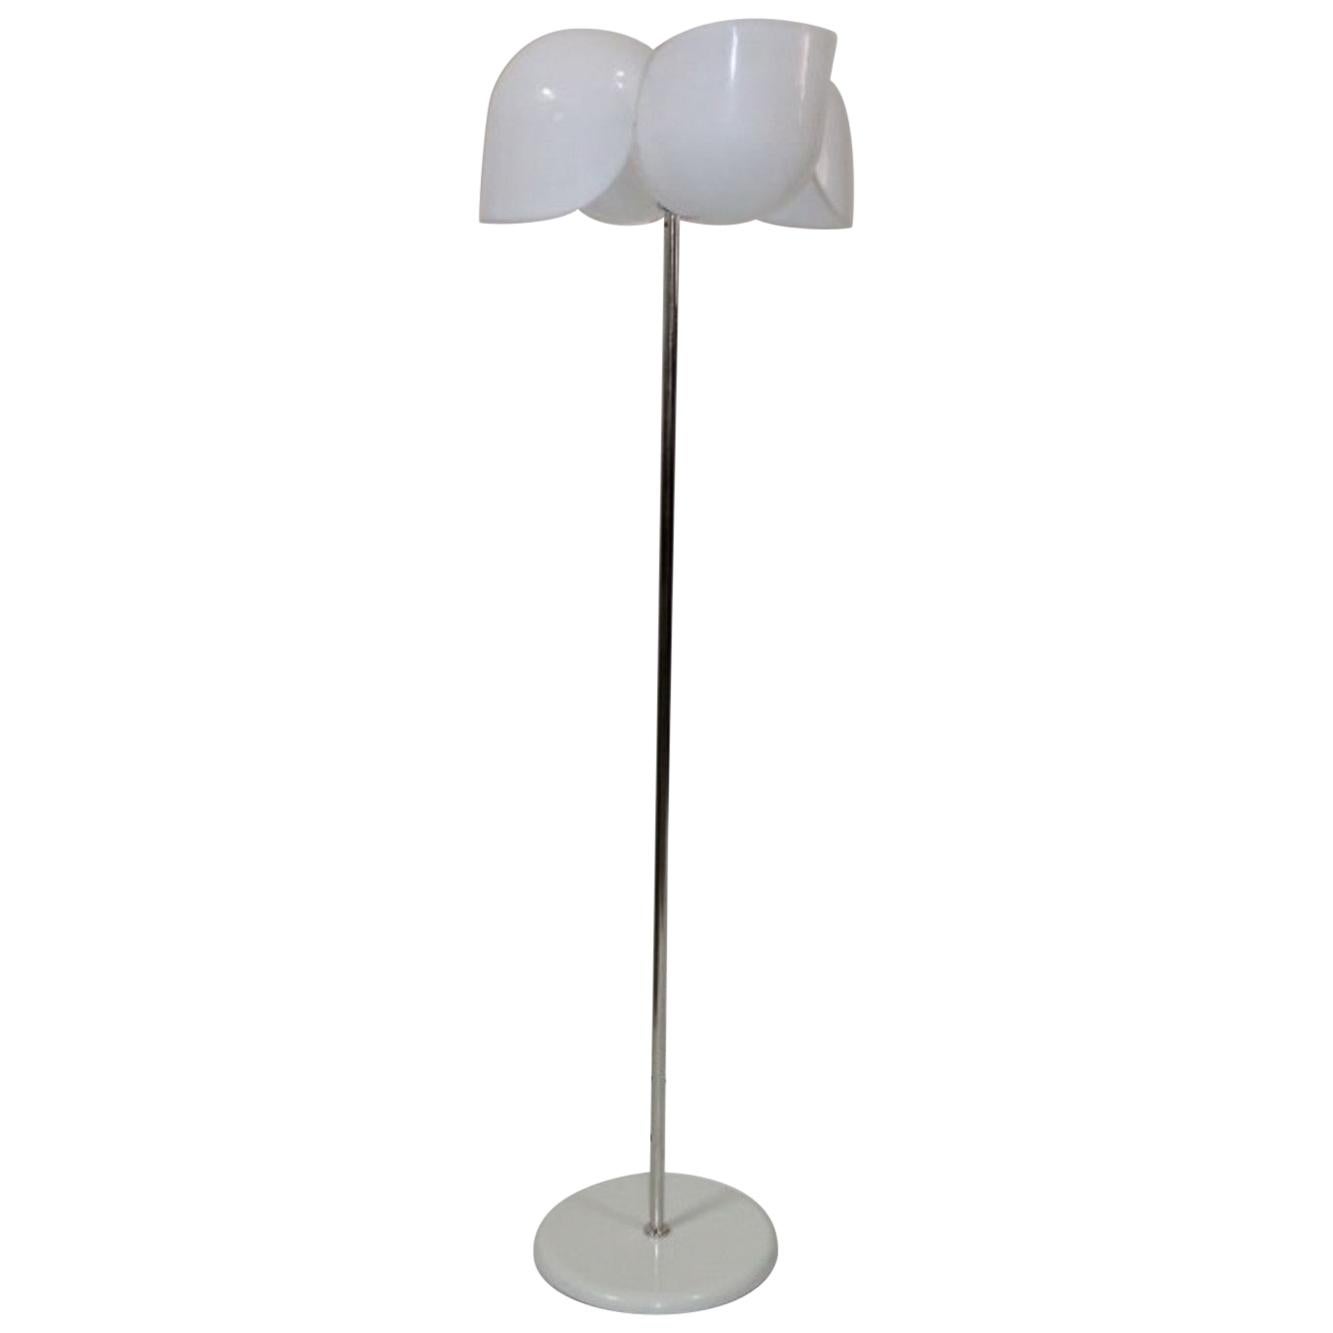 Dafne Floor Lamp by Olaf von Bohr for Valenti Luce, 1970s For Sale